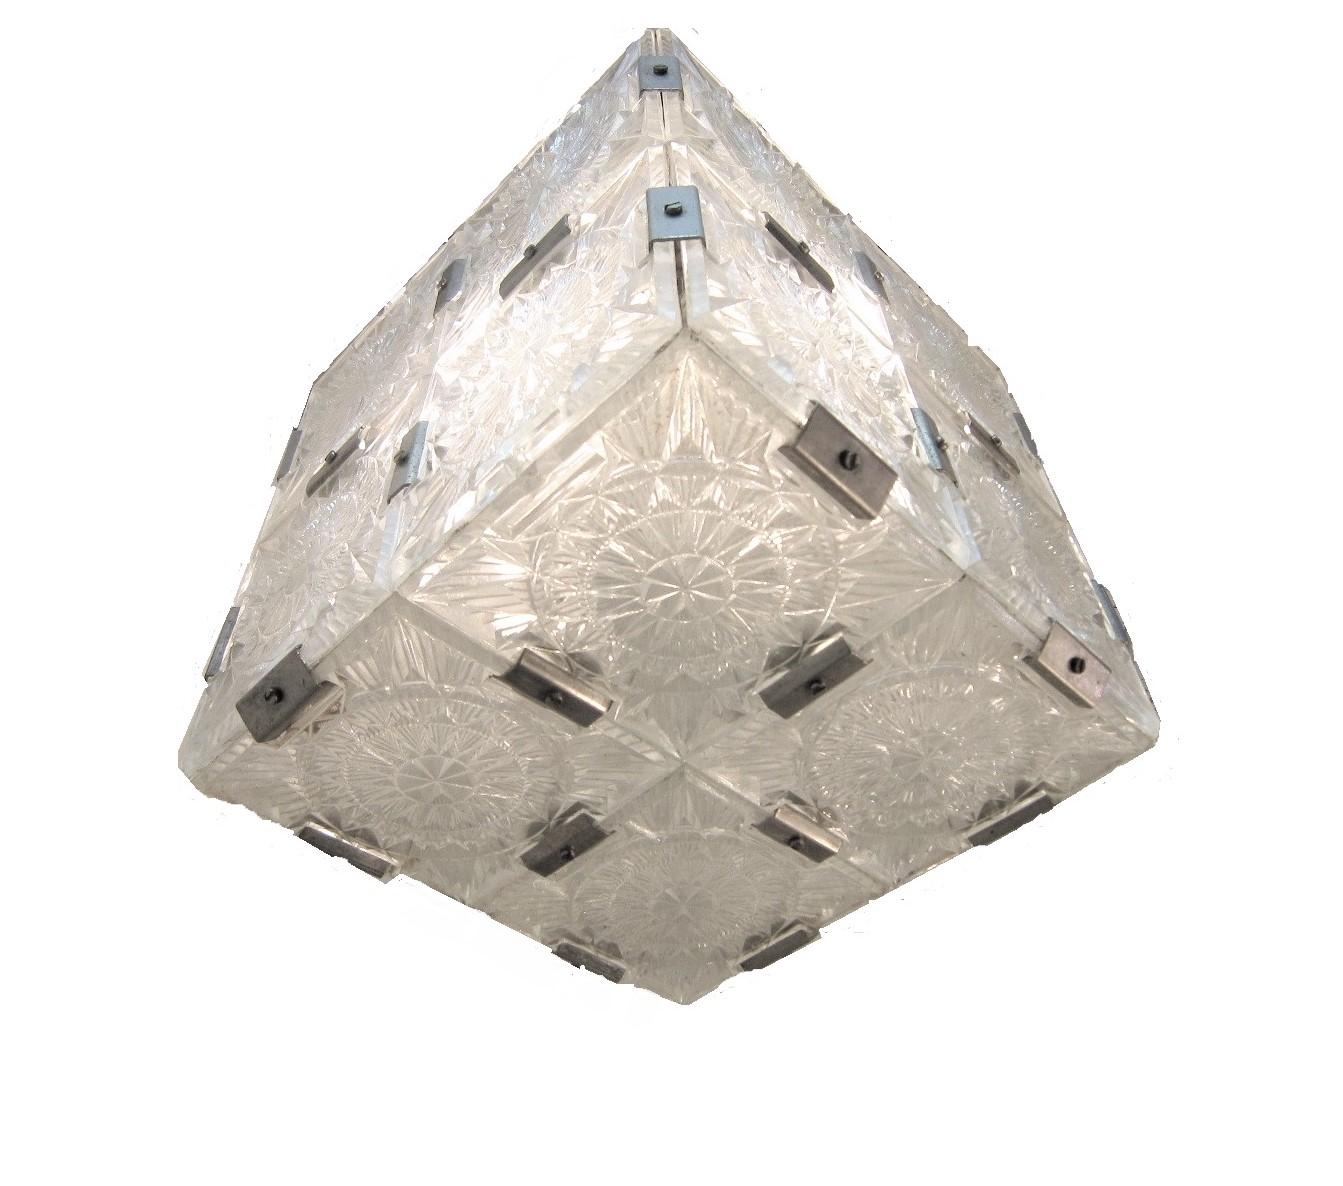 20th Century Set of Three Original Box Cube Pendant Lights, Cut Glass with Nickeled Clips For Sale